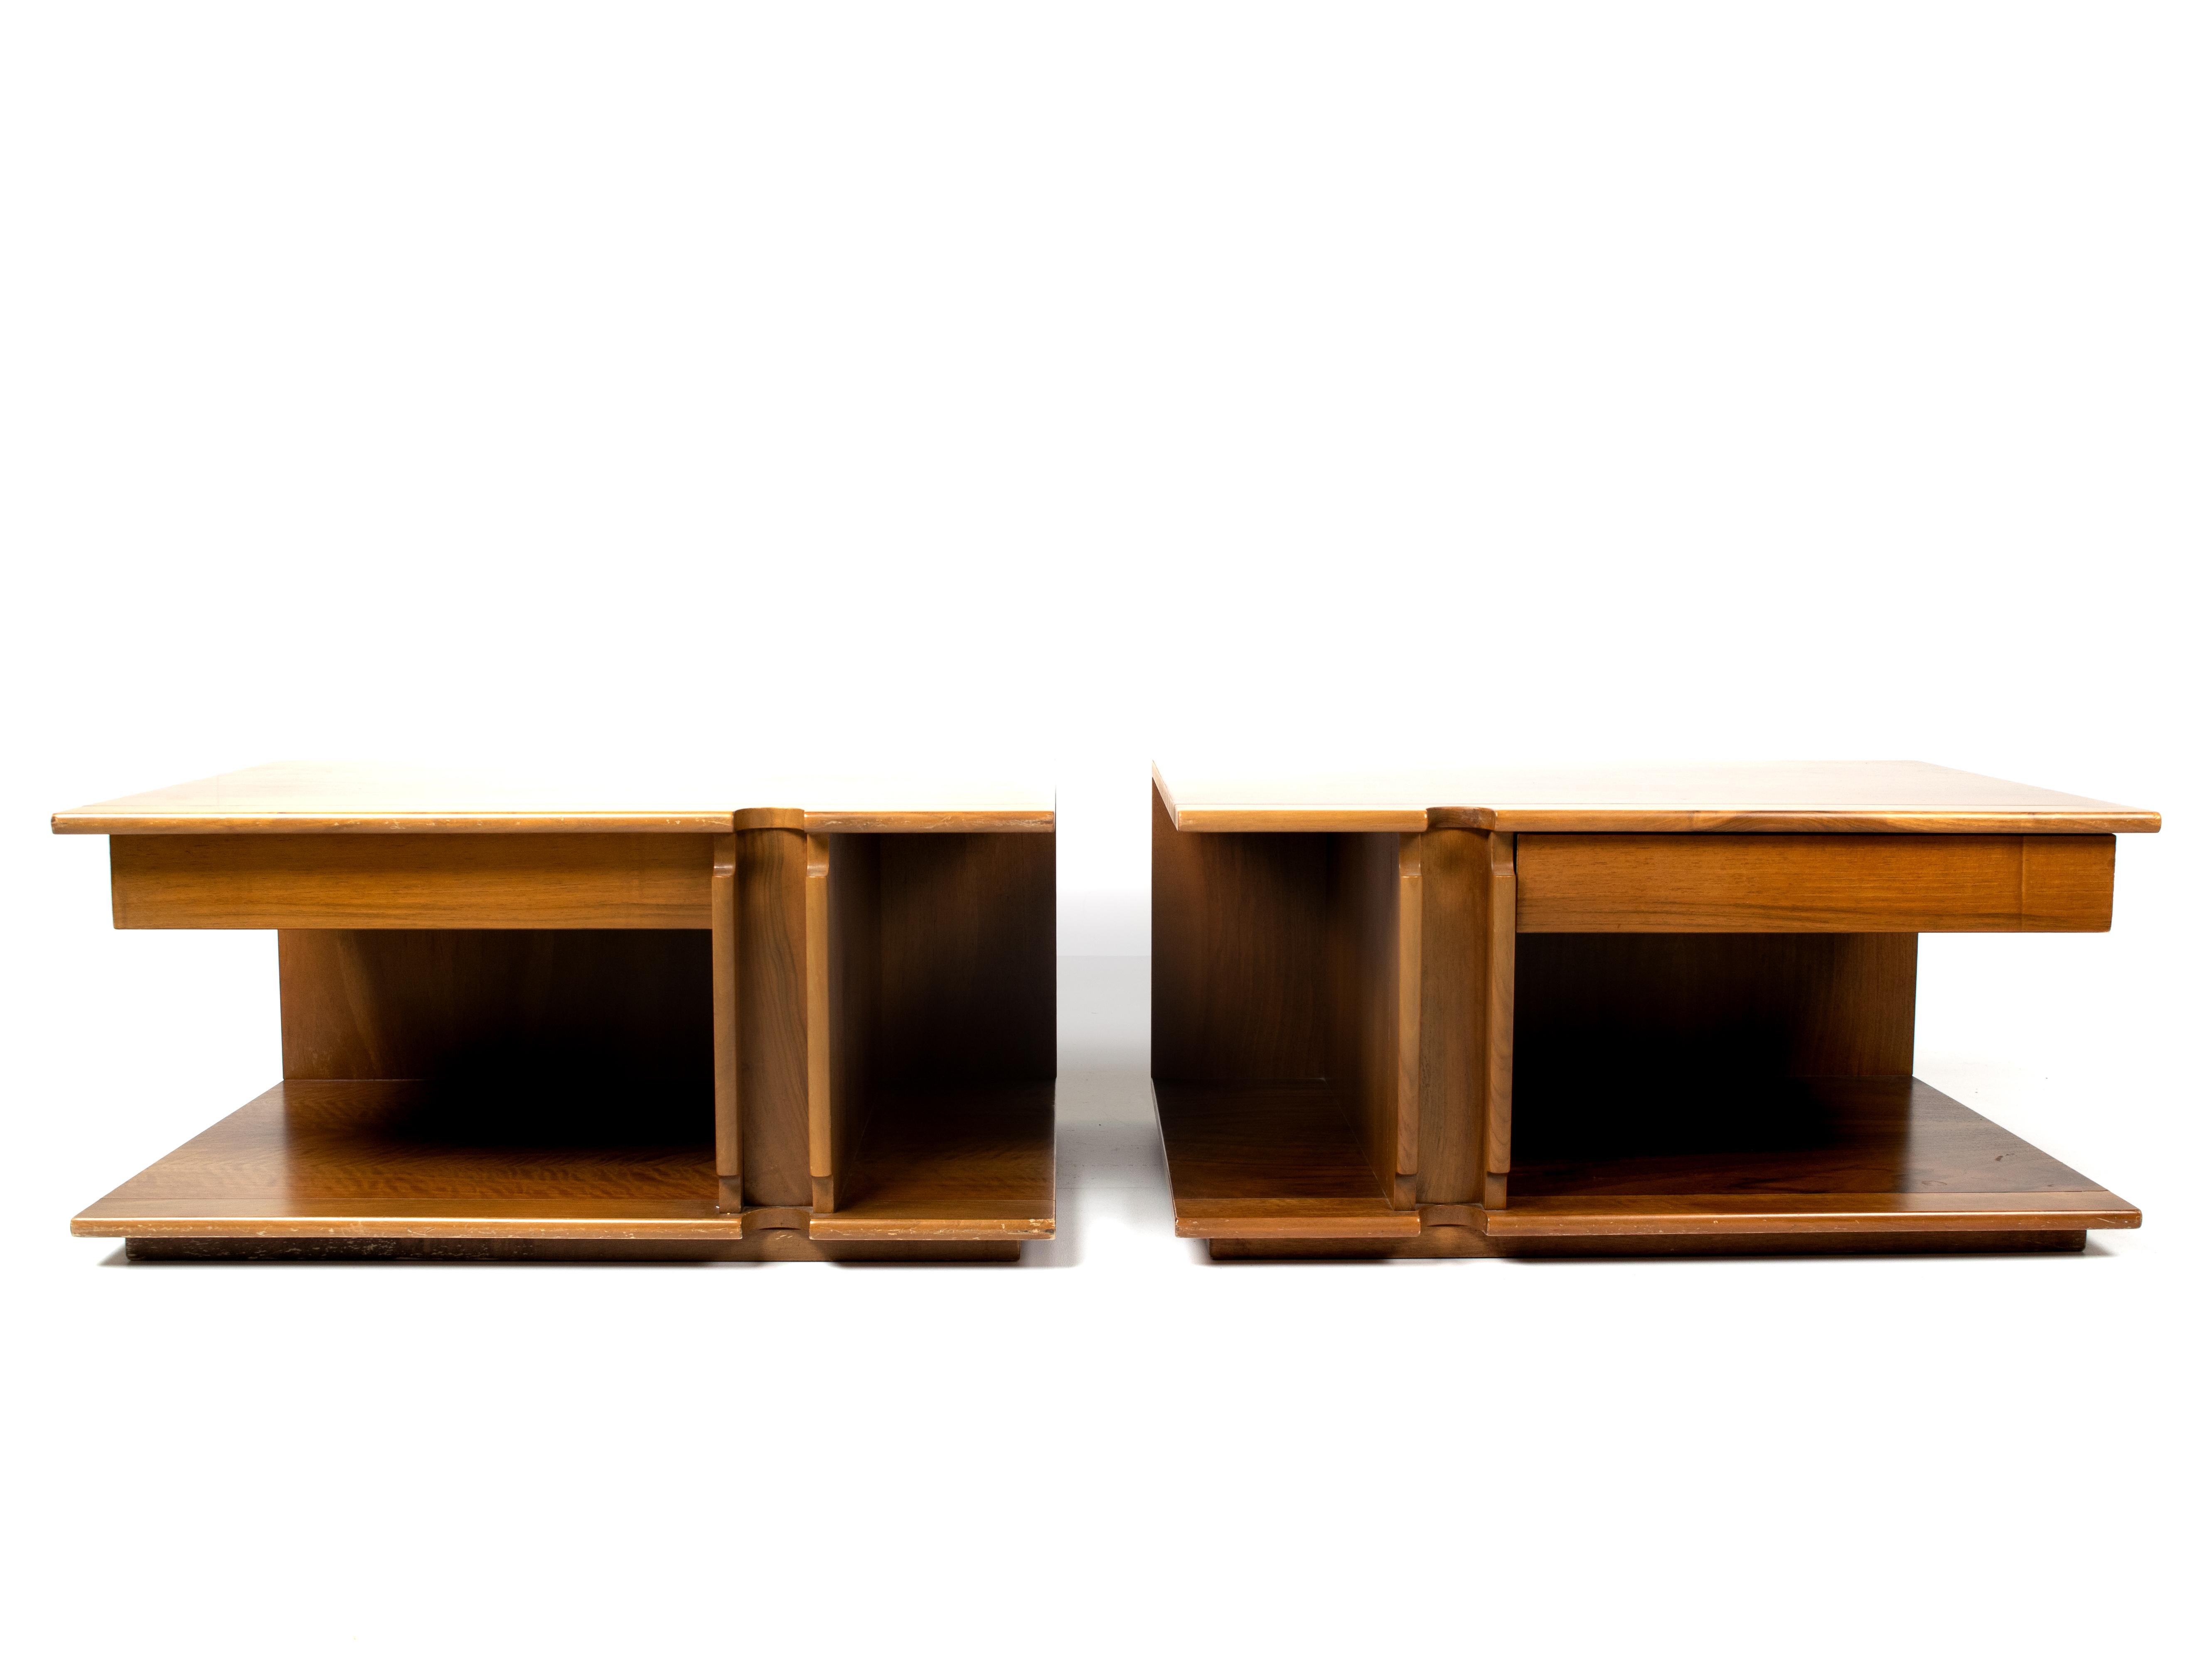 Pair of Italian modern nightstands by Franco Poli for Bernini, produced in Italy, circa 1970. The nightstands are fully made of wood and have a very nice shape that is mirrored between the two. Both have a drawer and are marked with a sticker of